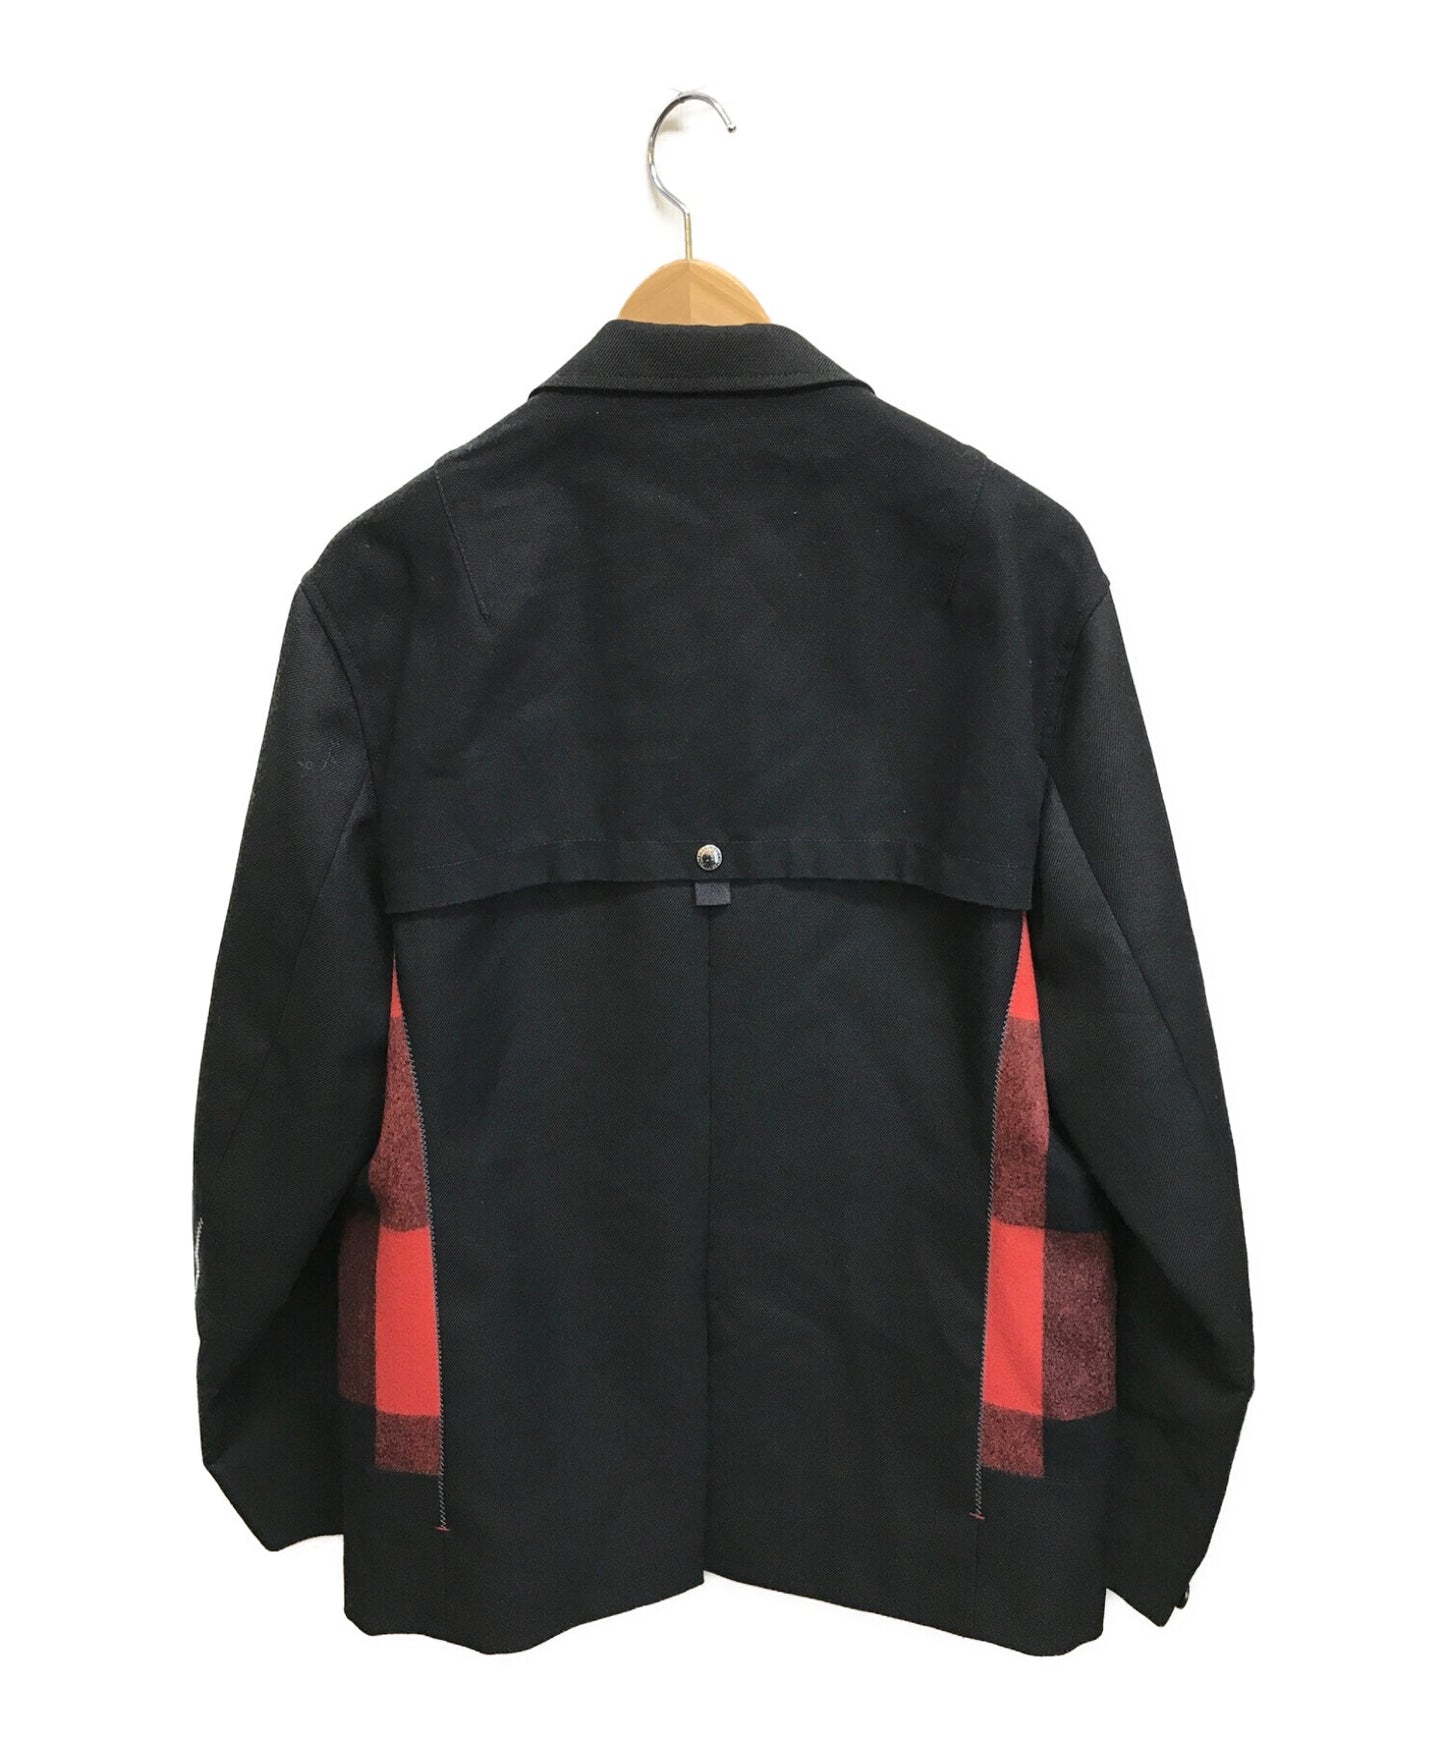 Comme des Garcons Junya Watanabe Man Wool Surge Duck-switched ตรวจสอบแจ็คเก็ต AD2021 WH-J006